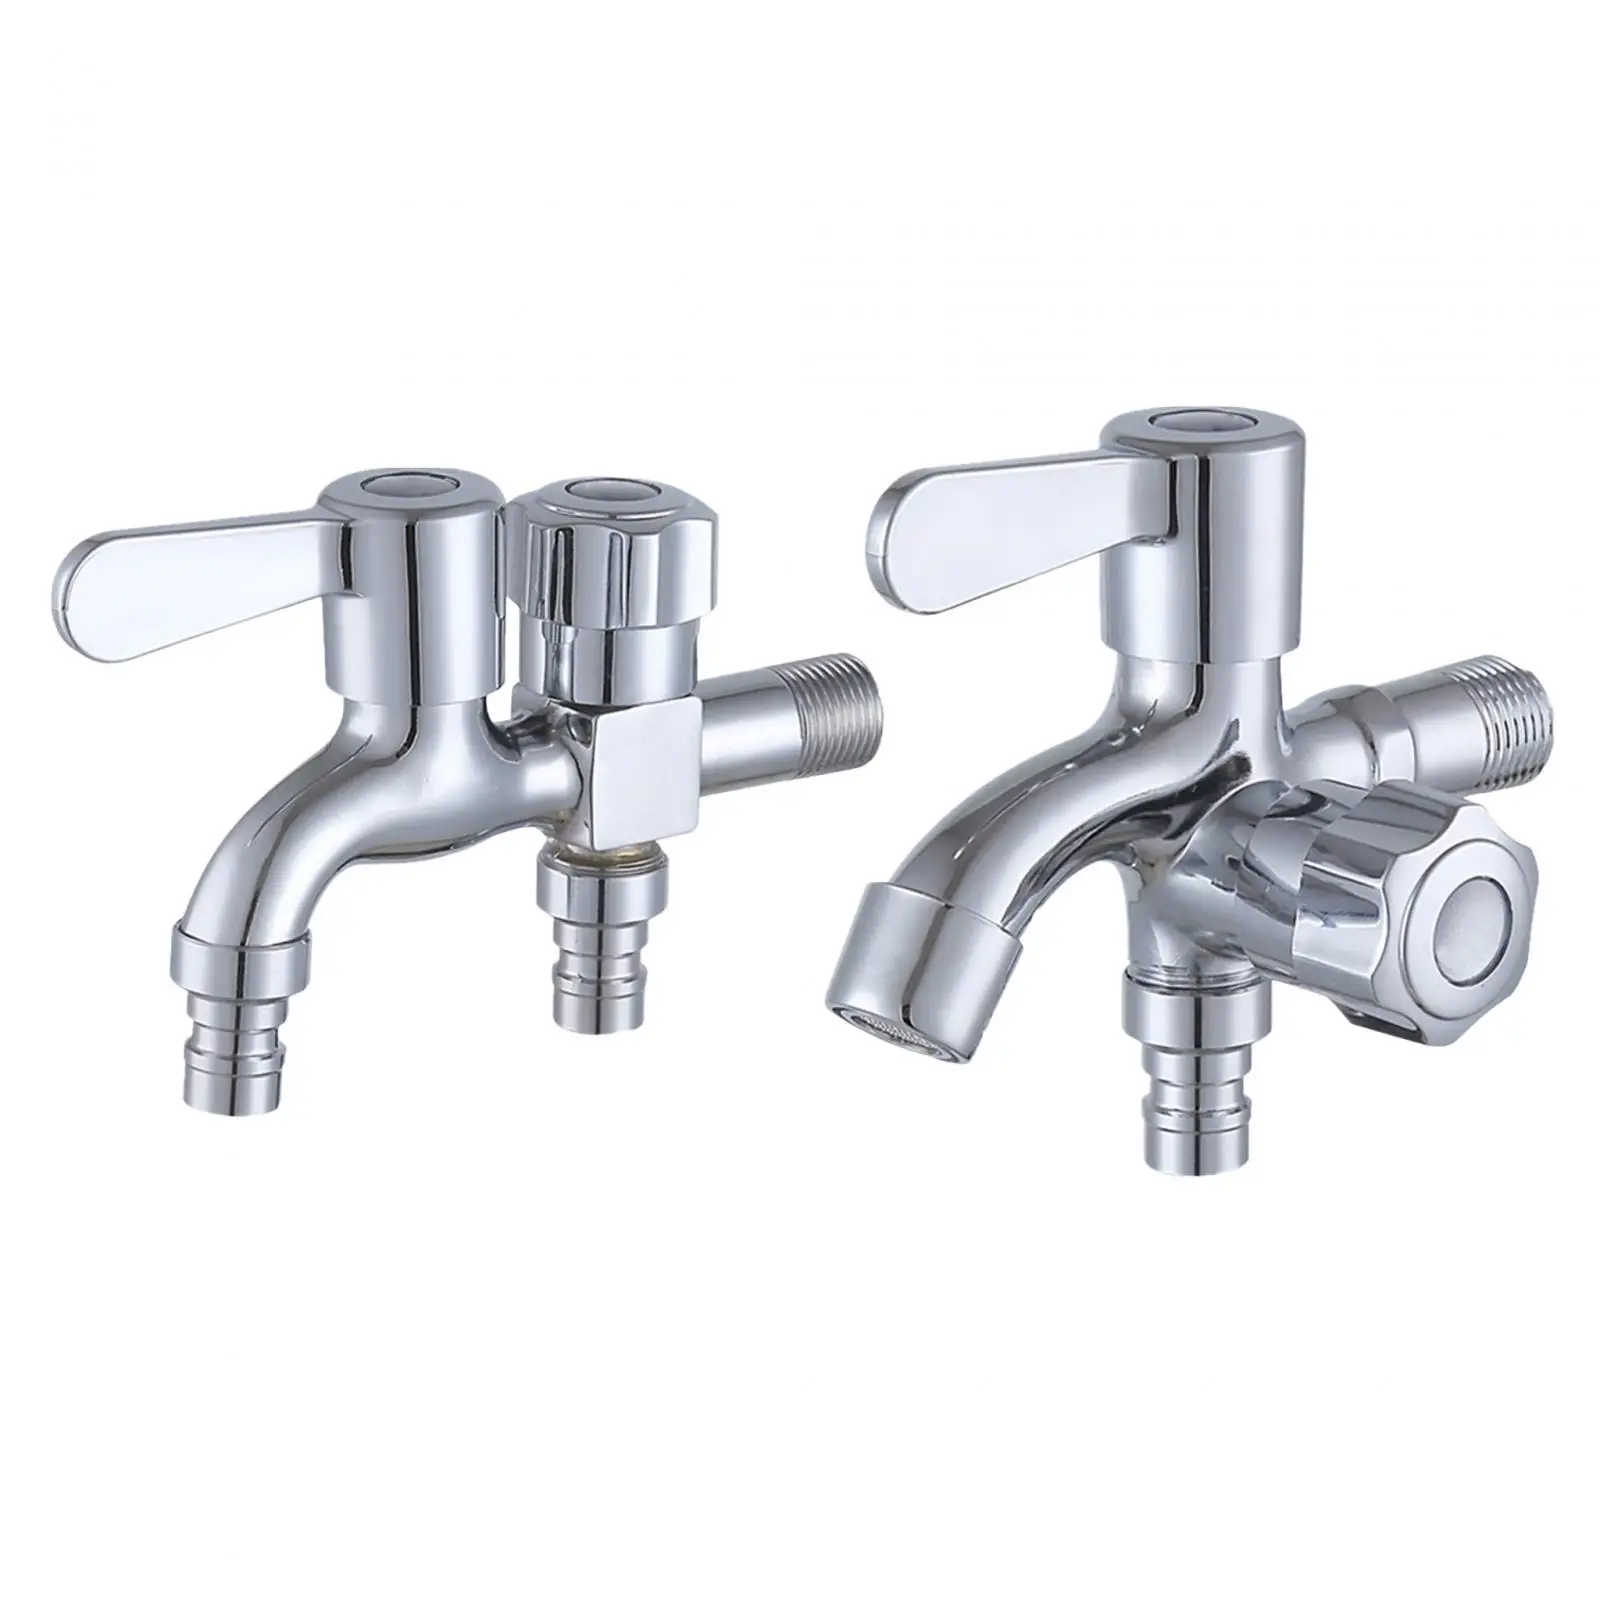 Washing Machine Water Faucet Sink Basin tap Double Spout Double Switch Bathroom